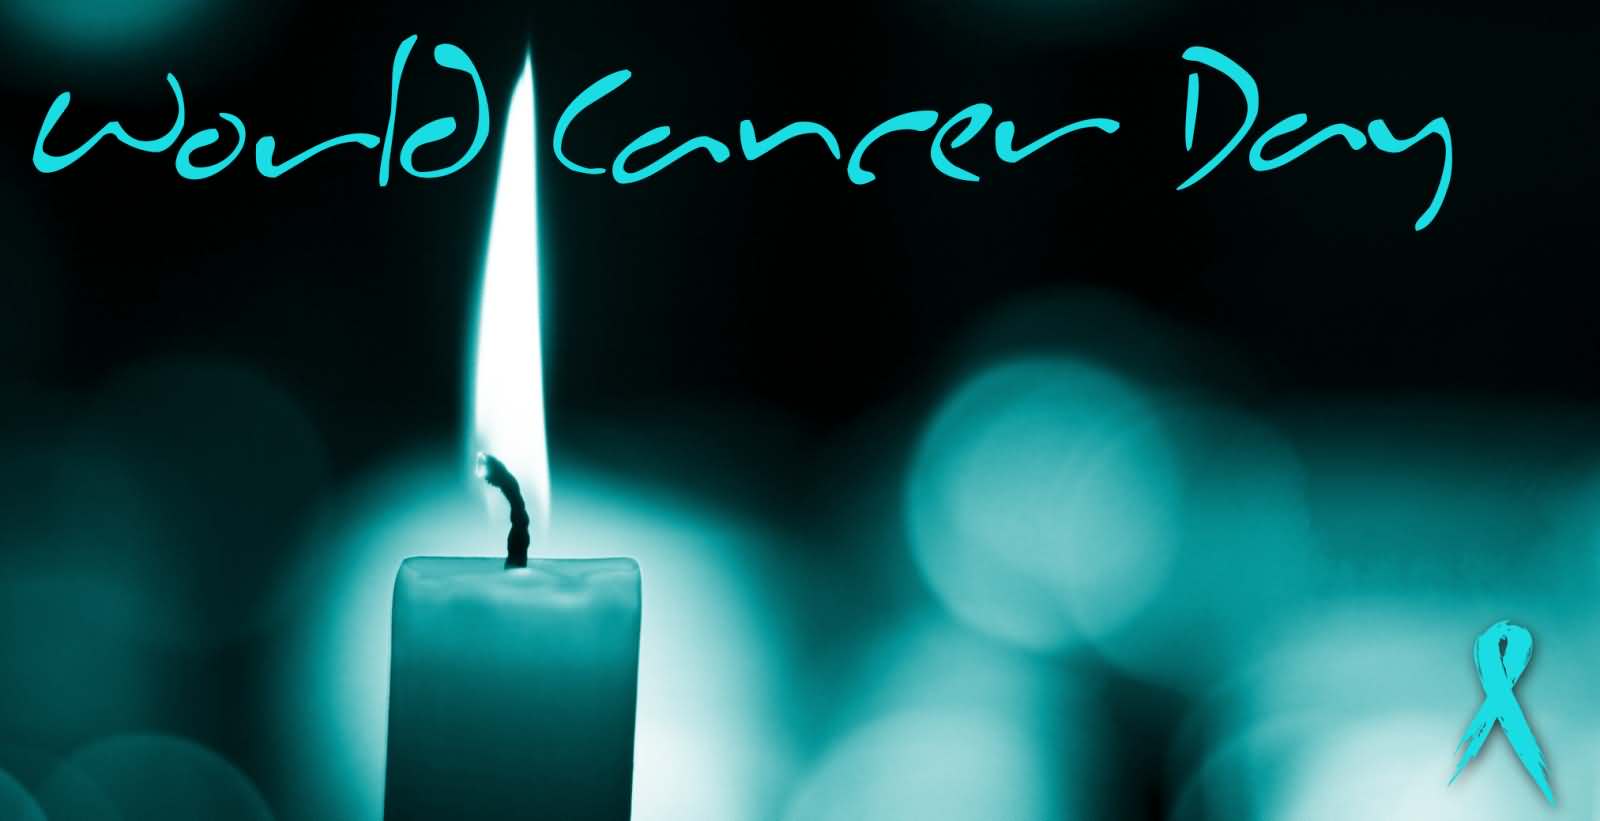 World Cancer Day candle picture